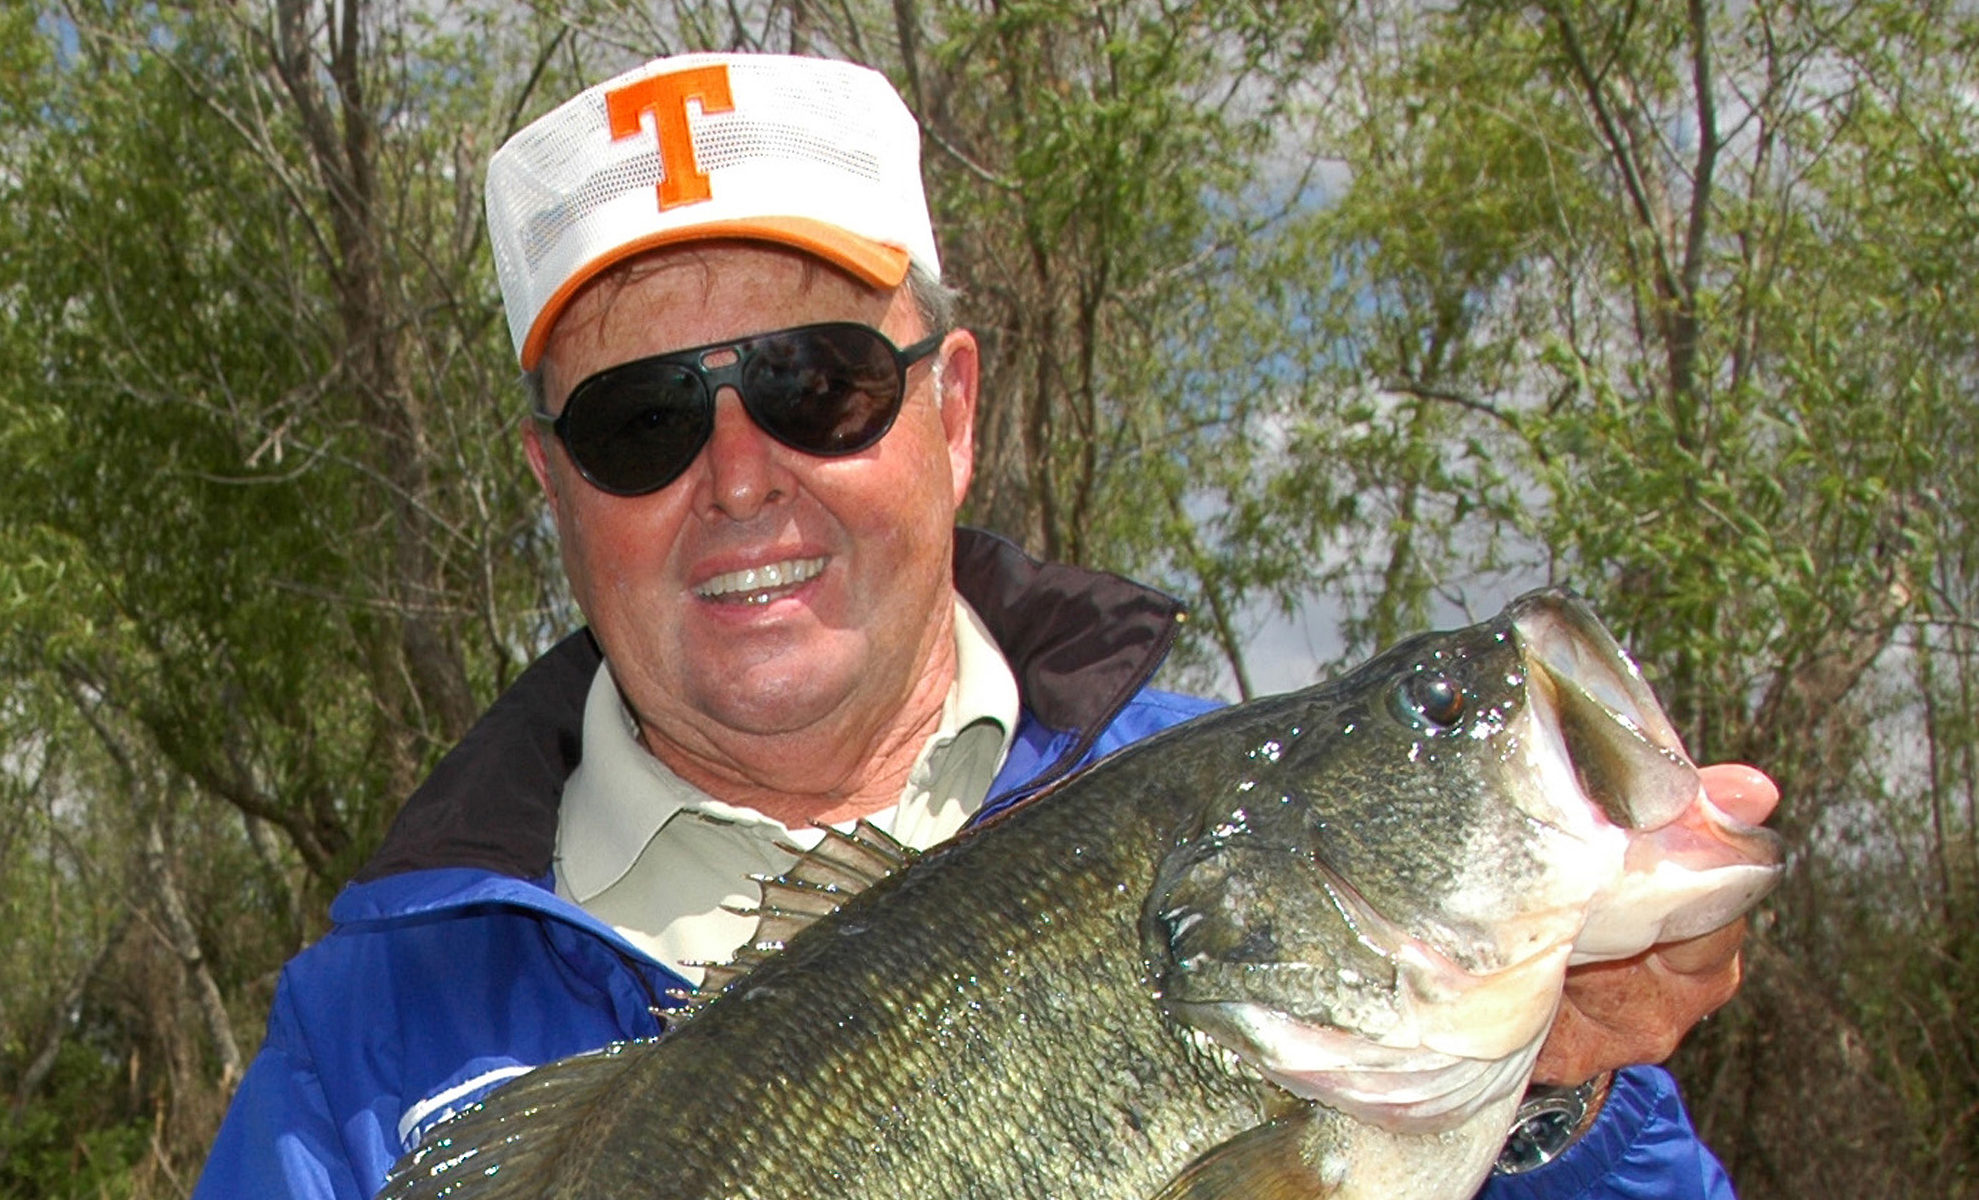 Dr. Dance' Lands the Biggest Catch of His Fishing Career